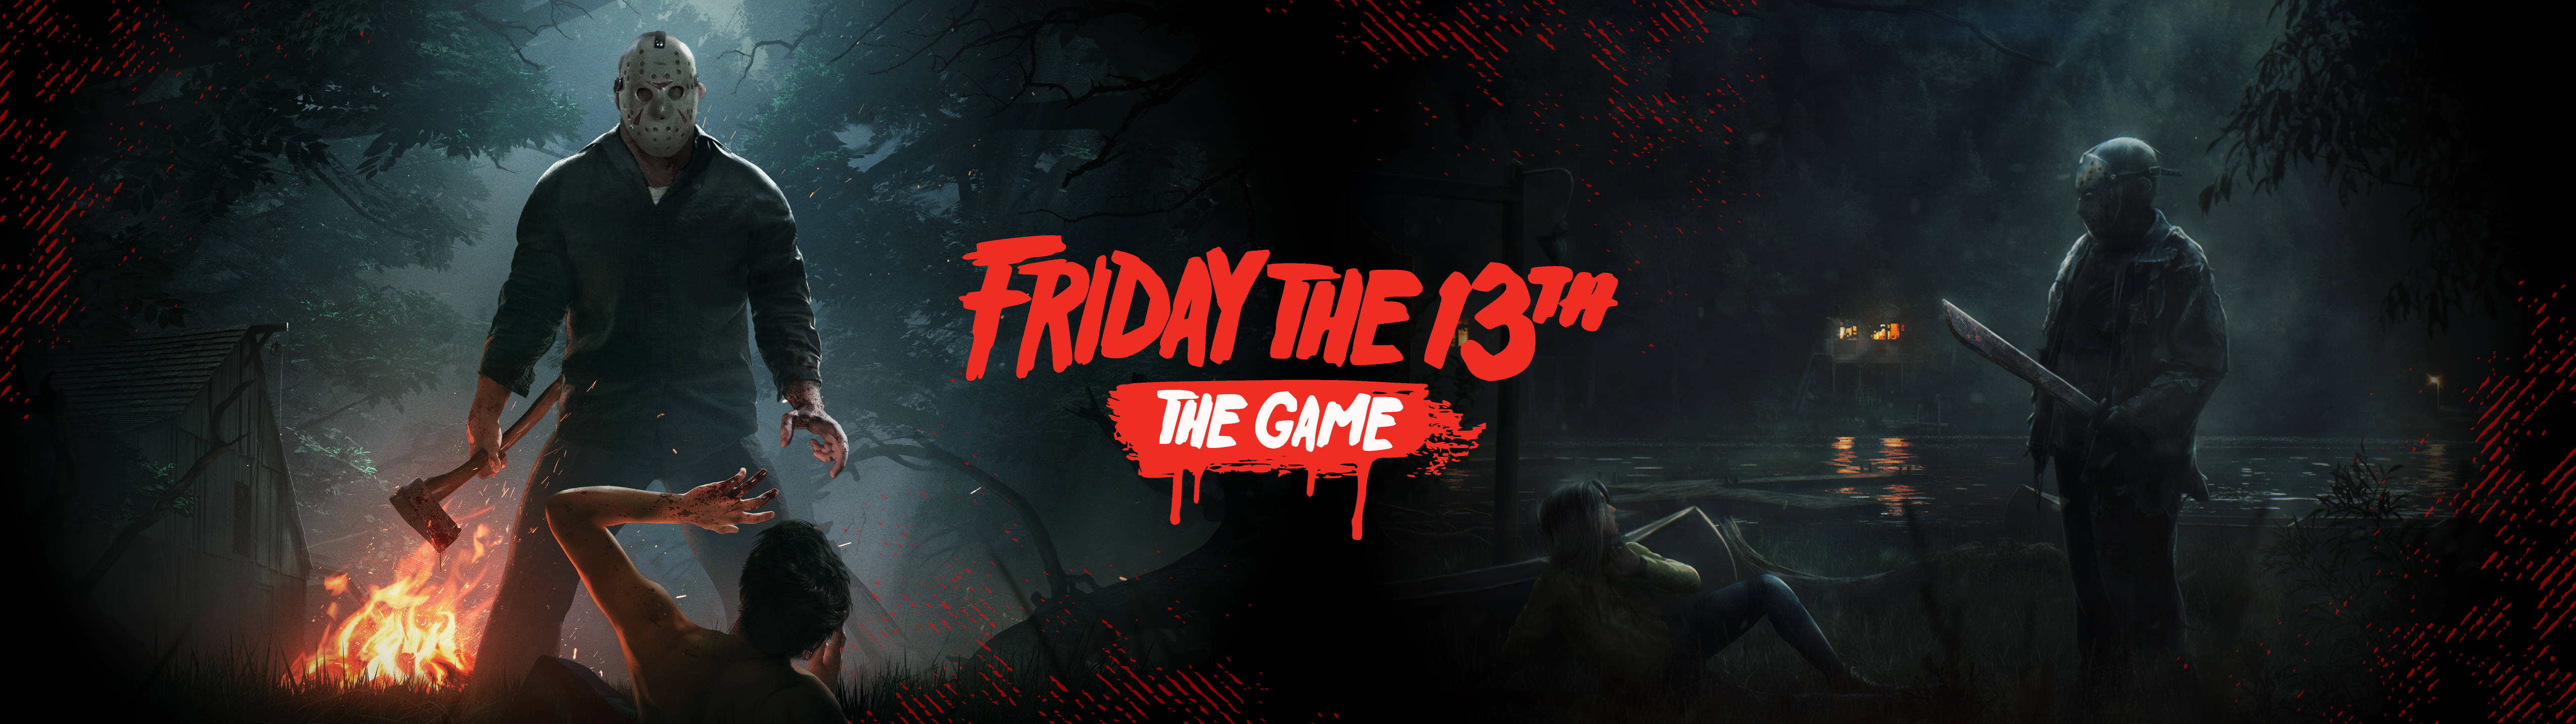 Friday The 13th 5120x1440 Gaming Wallpaper